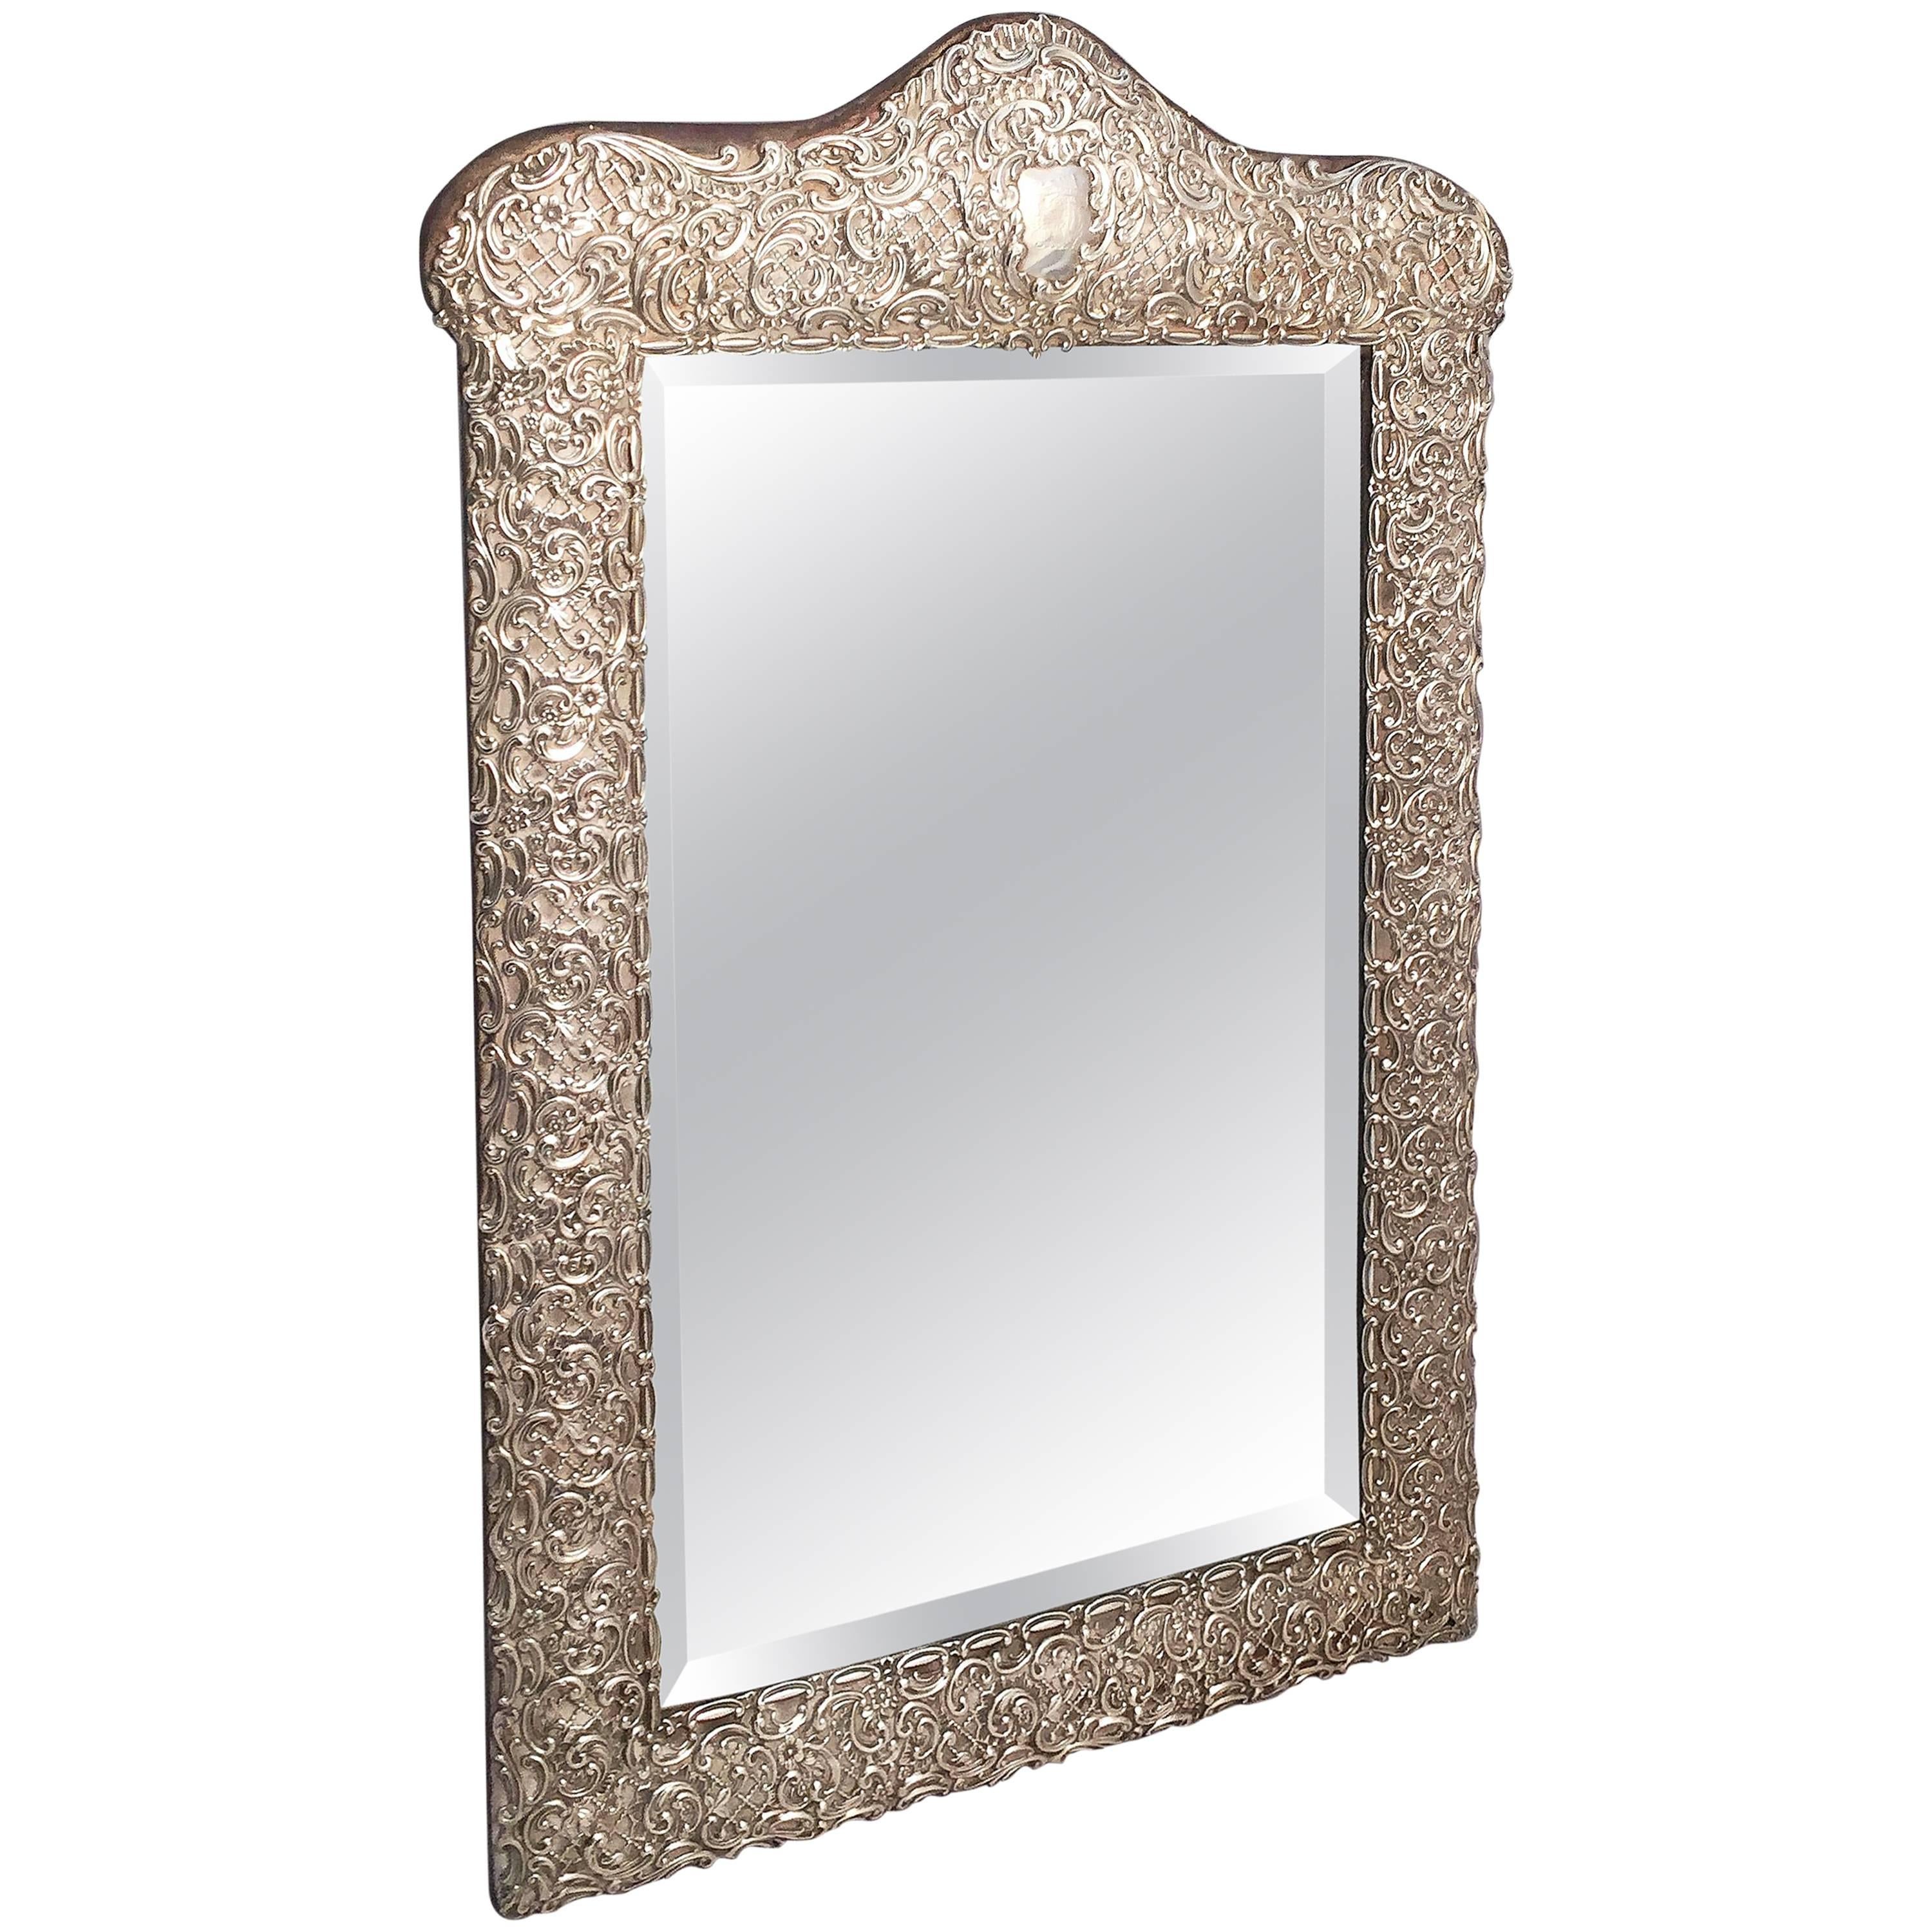 English Vanity or Table Mirror of Sterling Silver, circa 1898